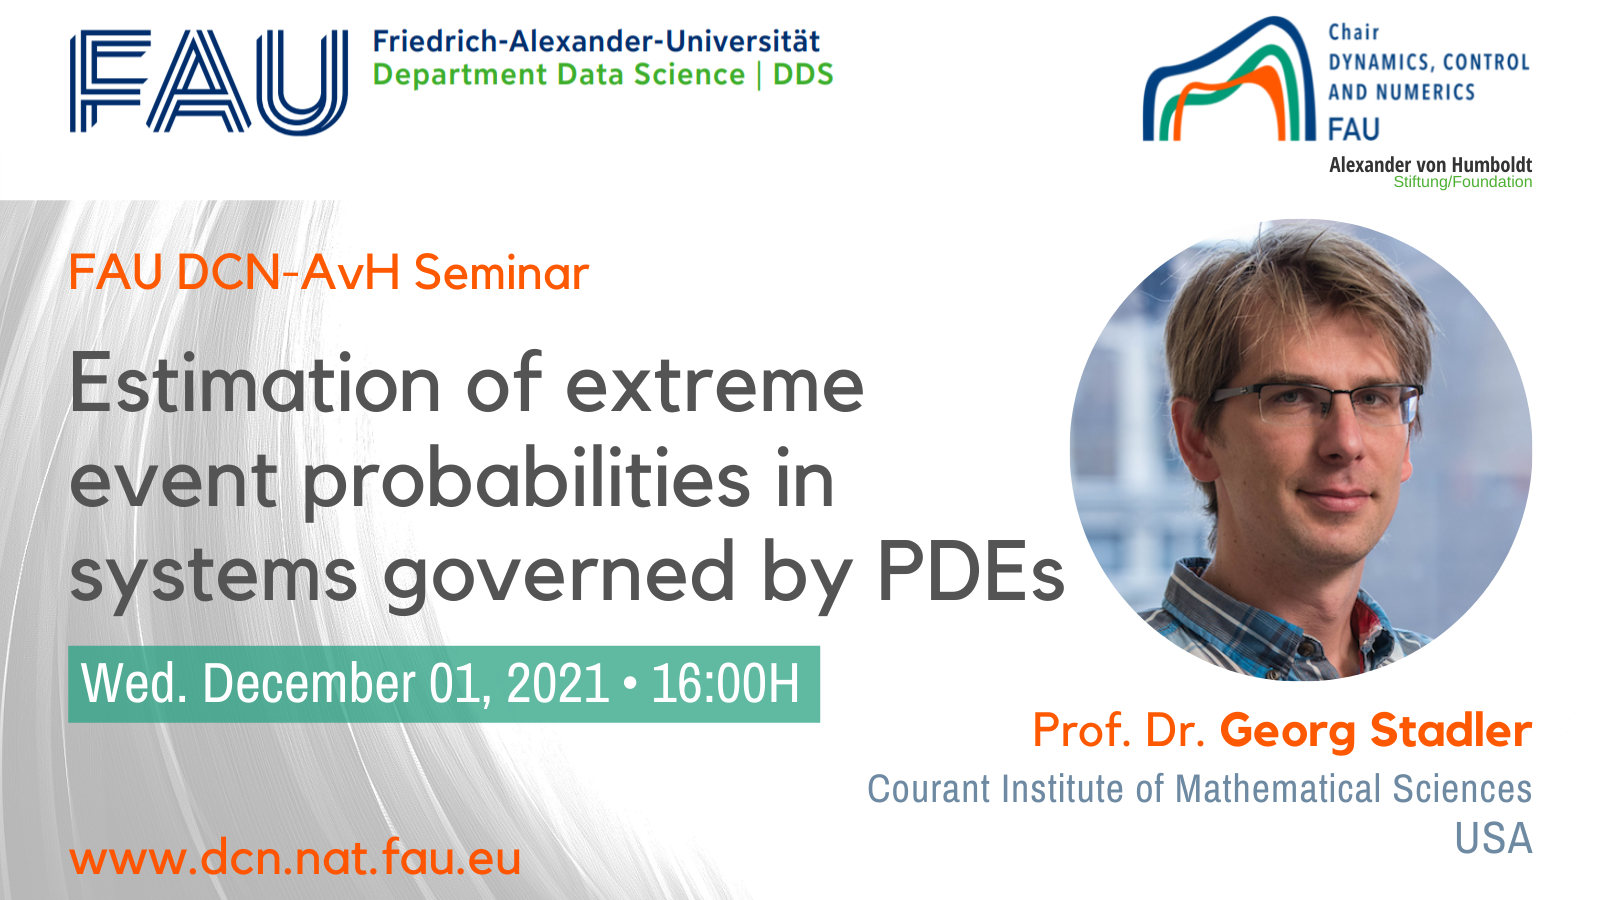 Estimation of extreme event probabilities in systems governed by PDEs